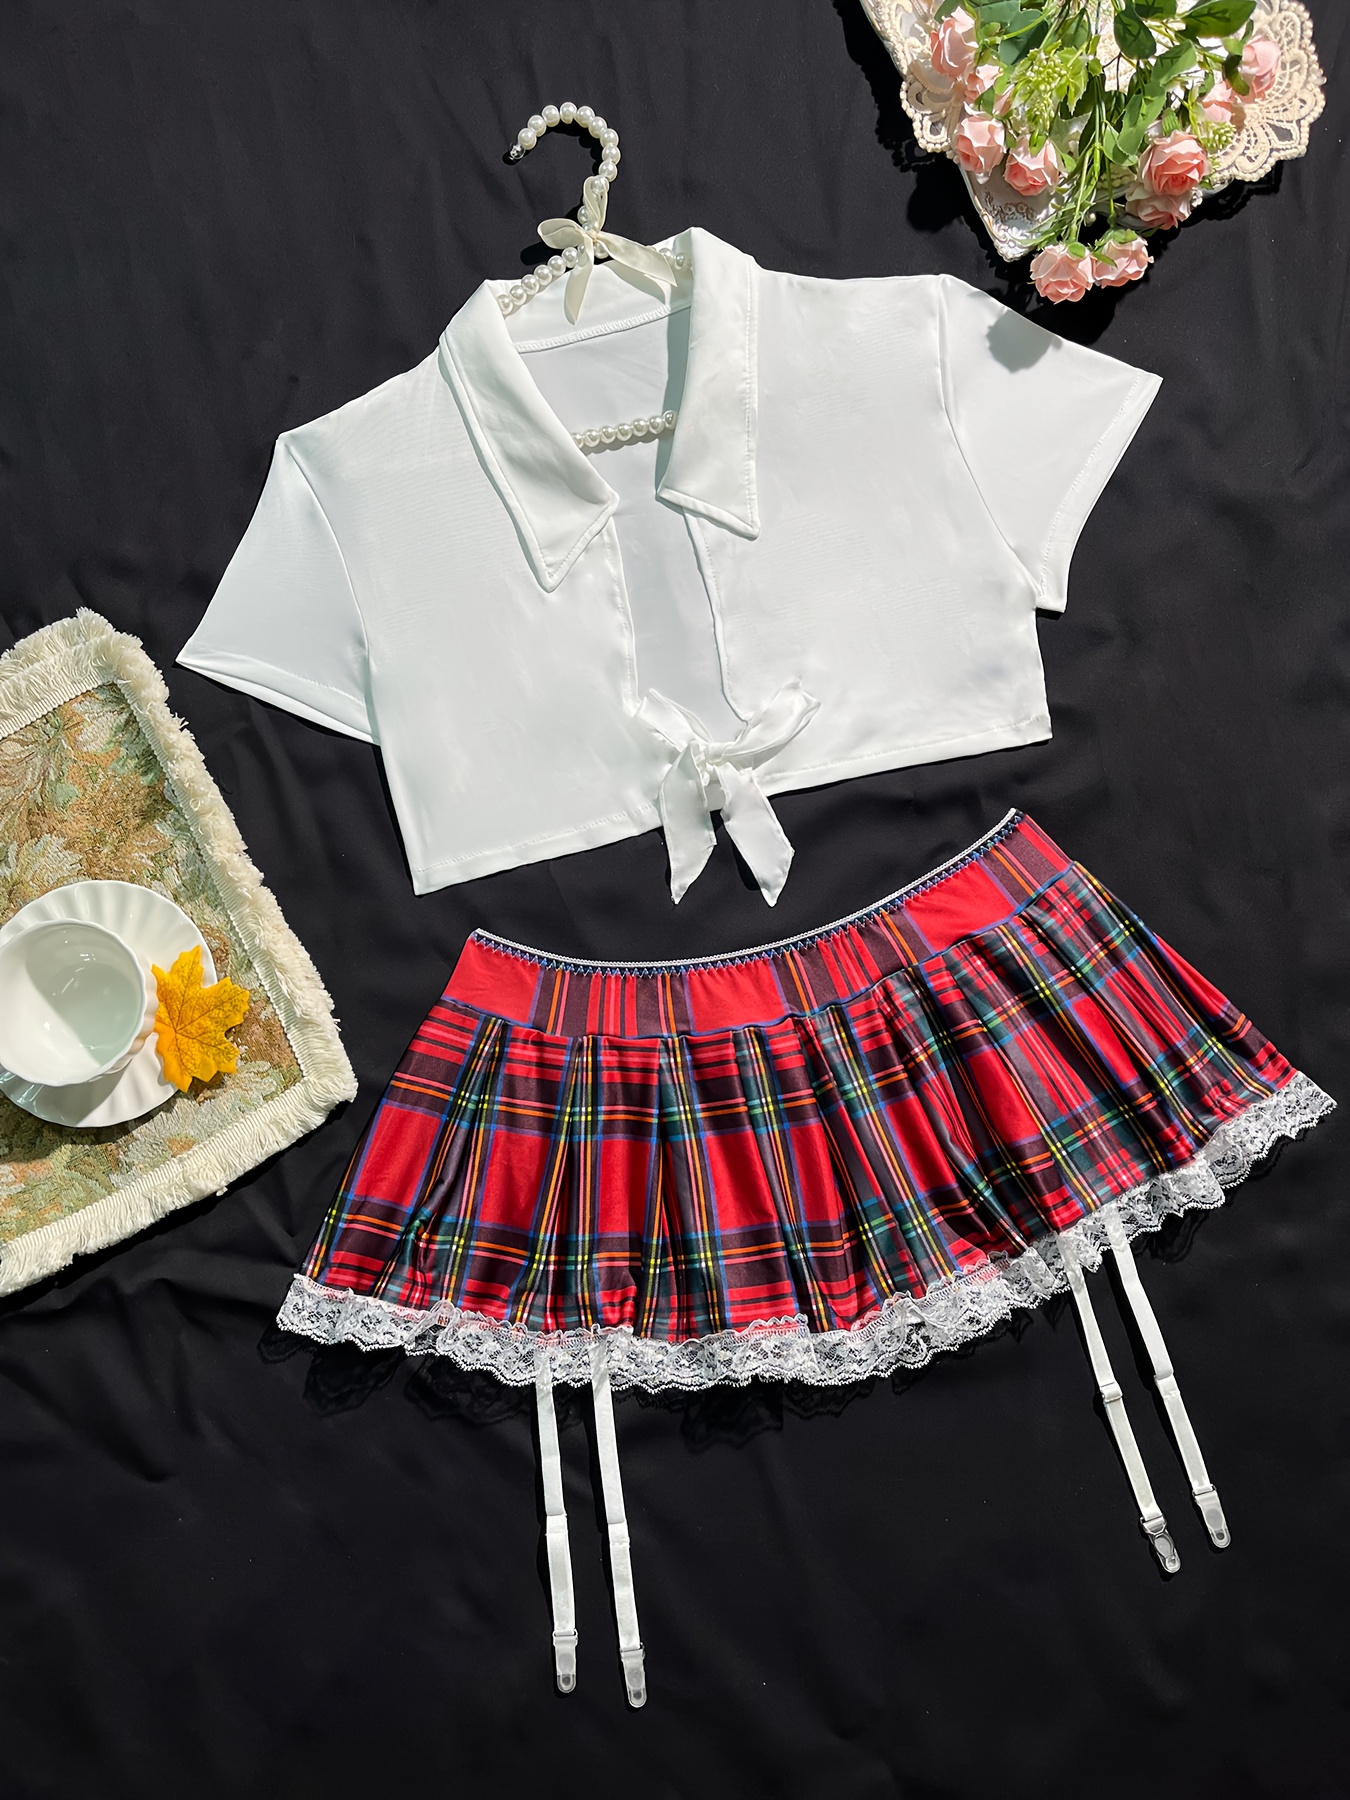 Open Bra Sexy Lingerie Schoolgirl Hollow Porn Outfit Underwear Set Plaid  Mini Skirts For Sex Games Role-Playing Student Uniform